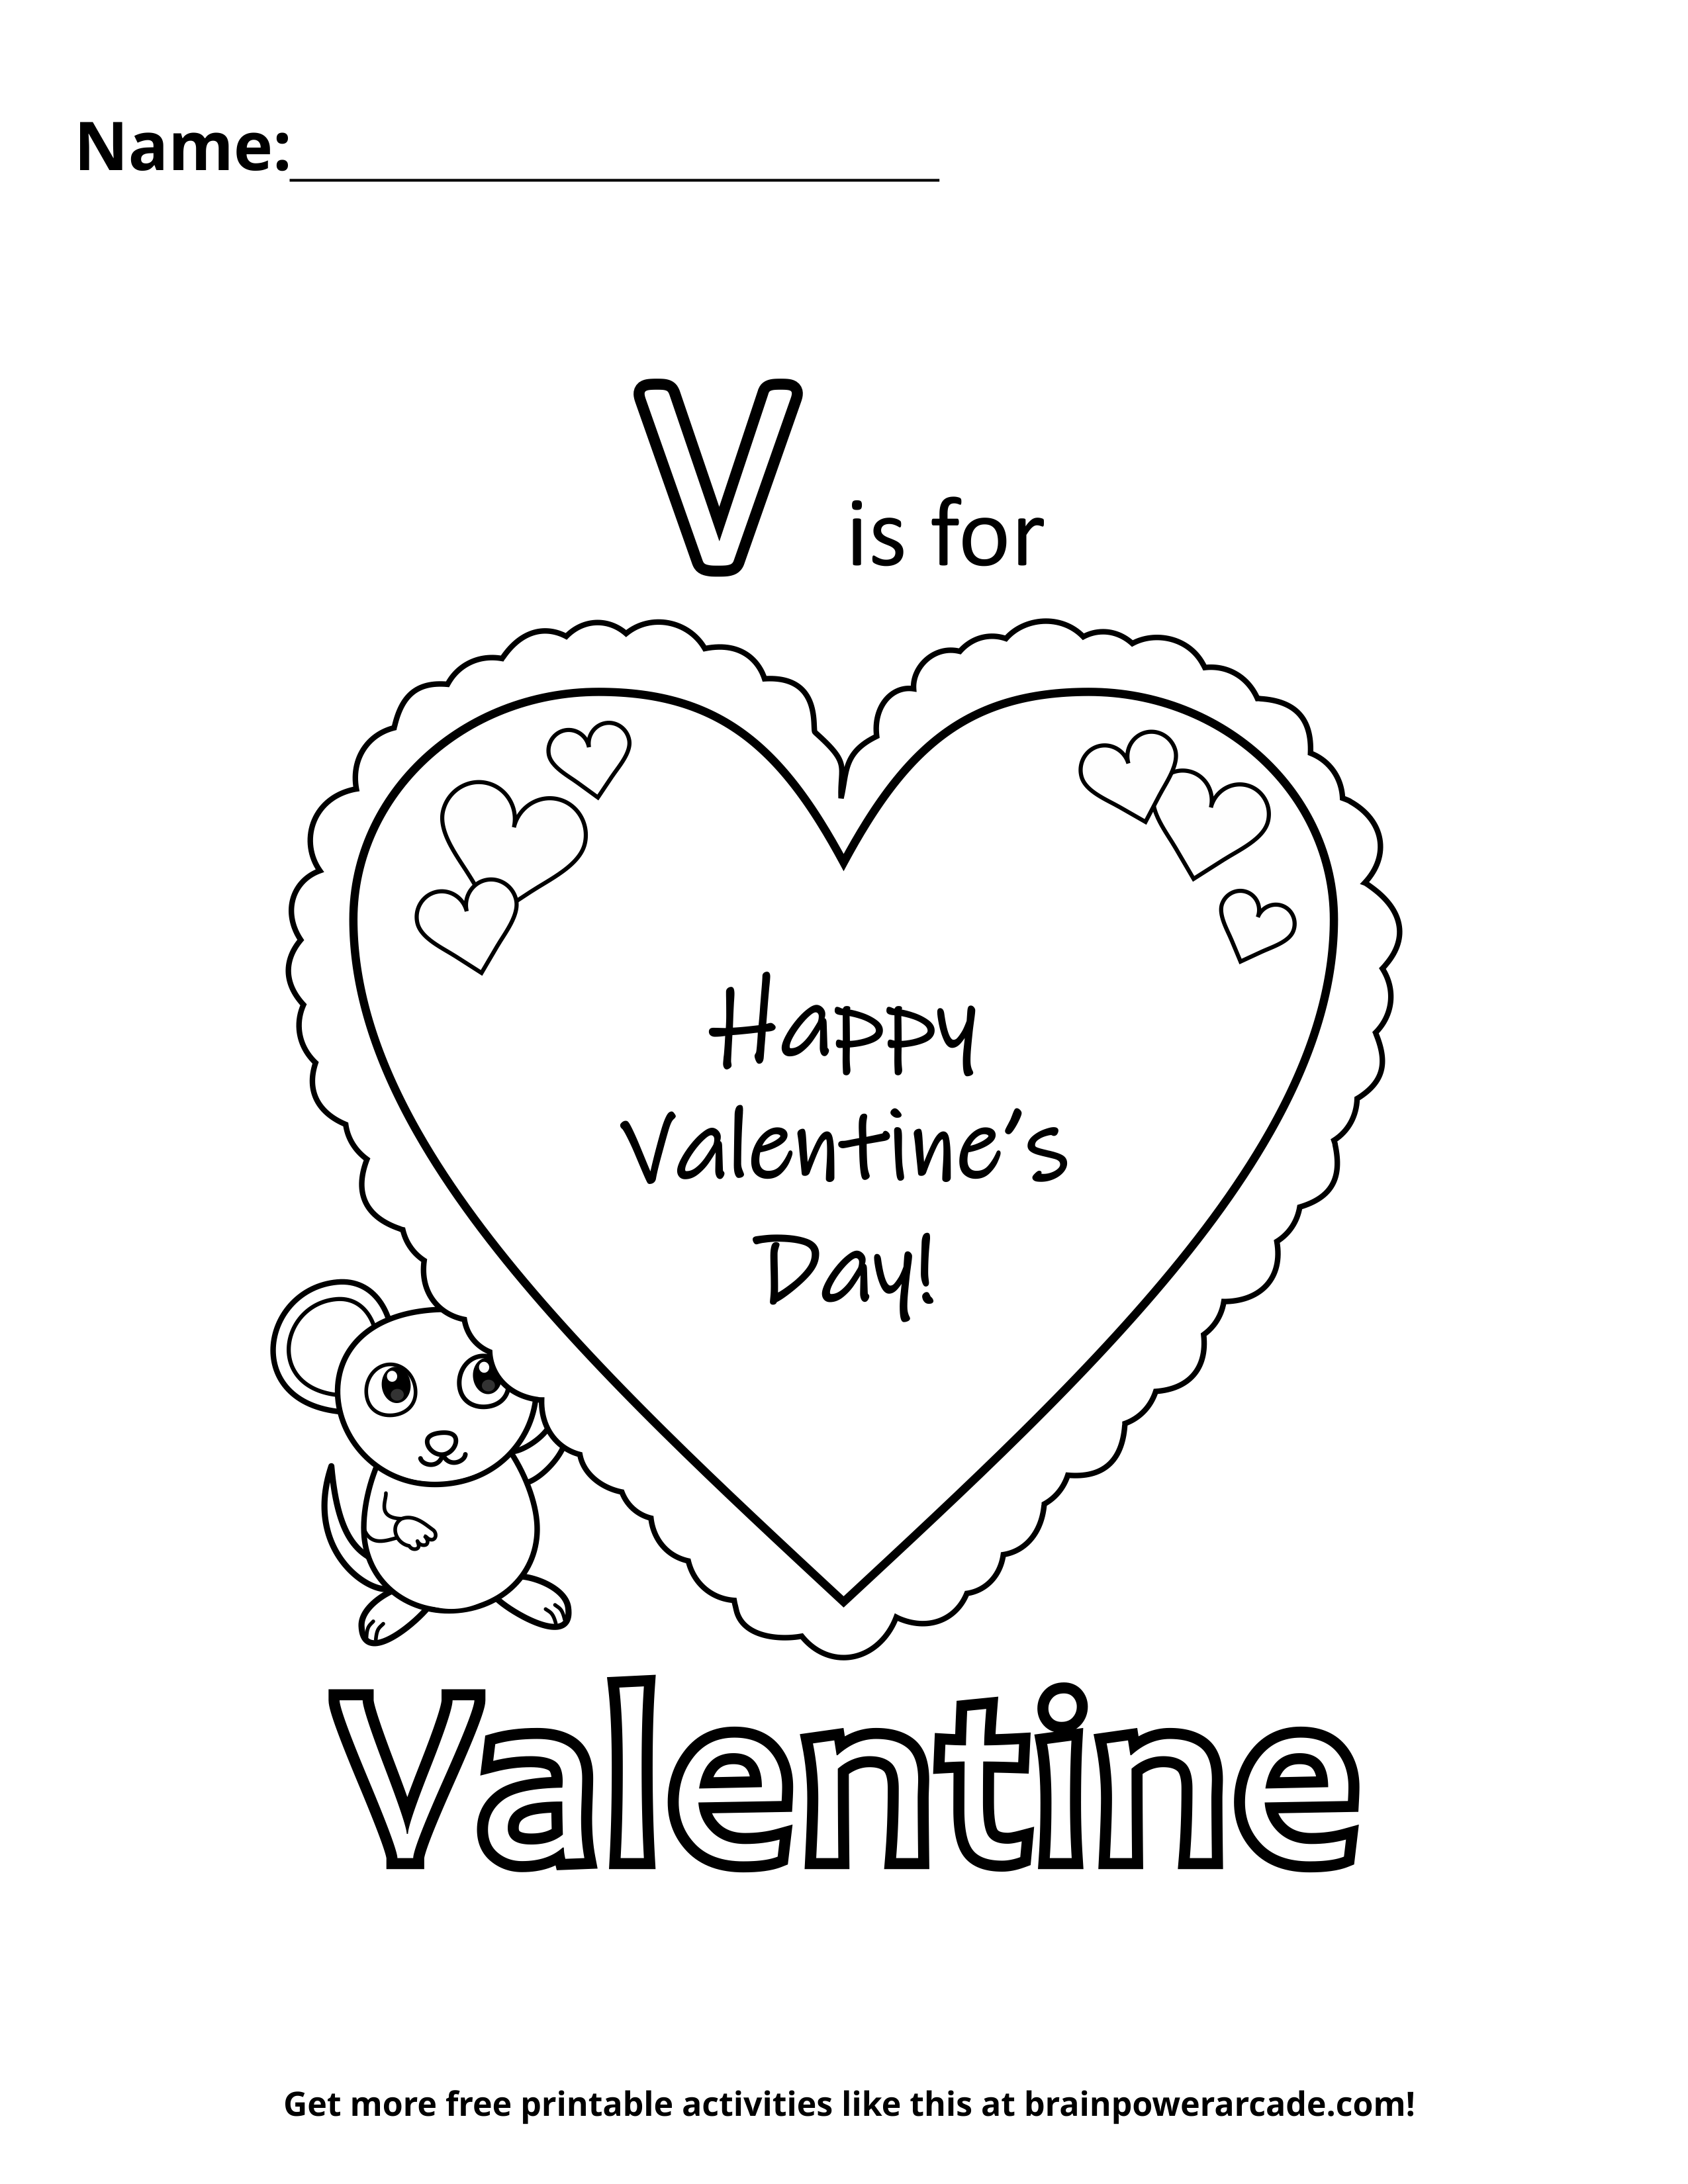 V is for Valentine Coloring Page